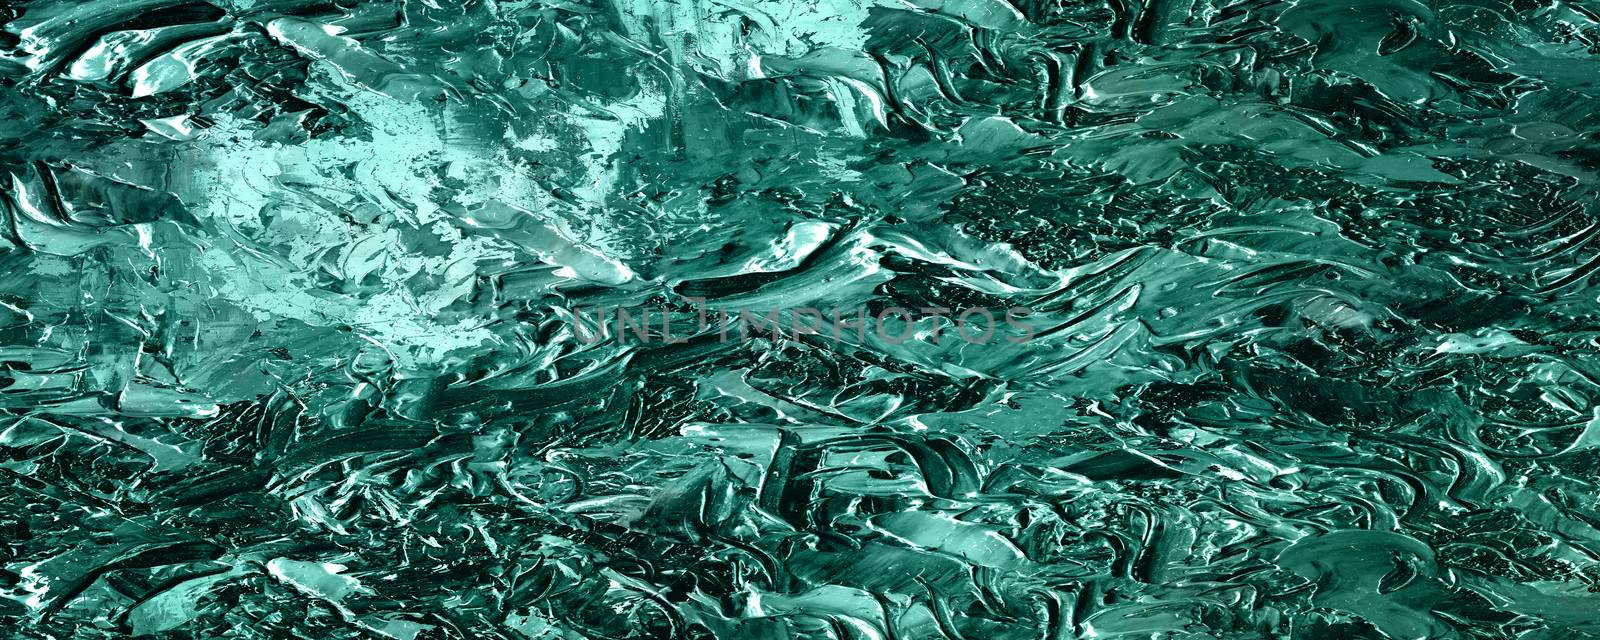 Abstract background image in green tones, with imitation of sea waves